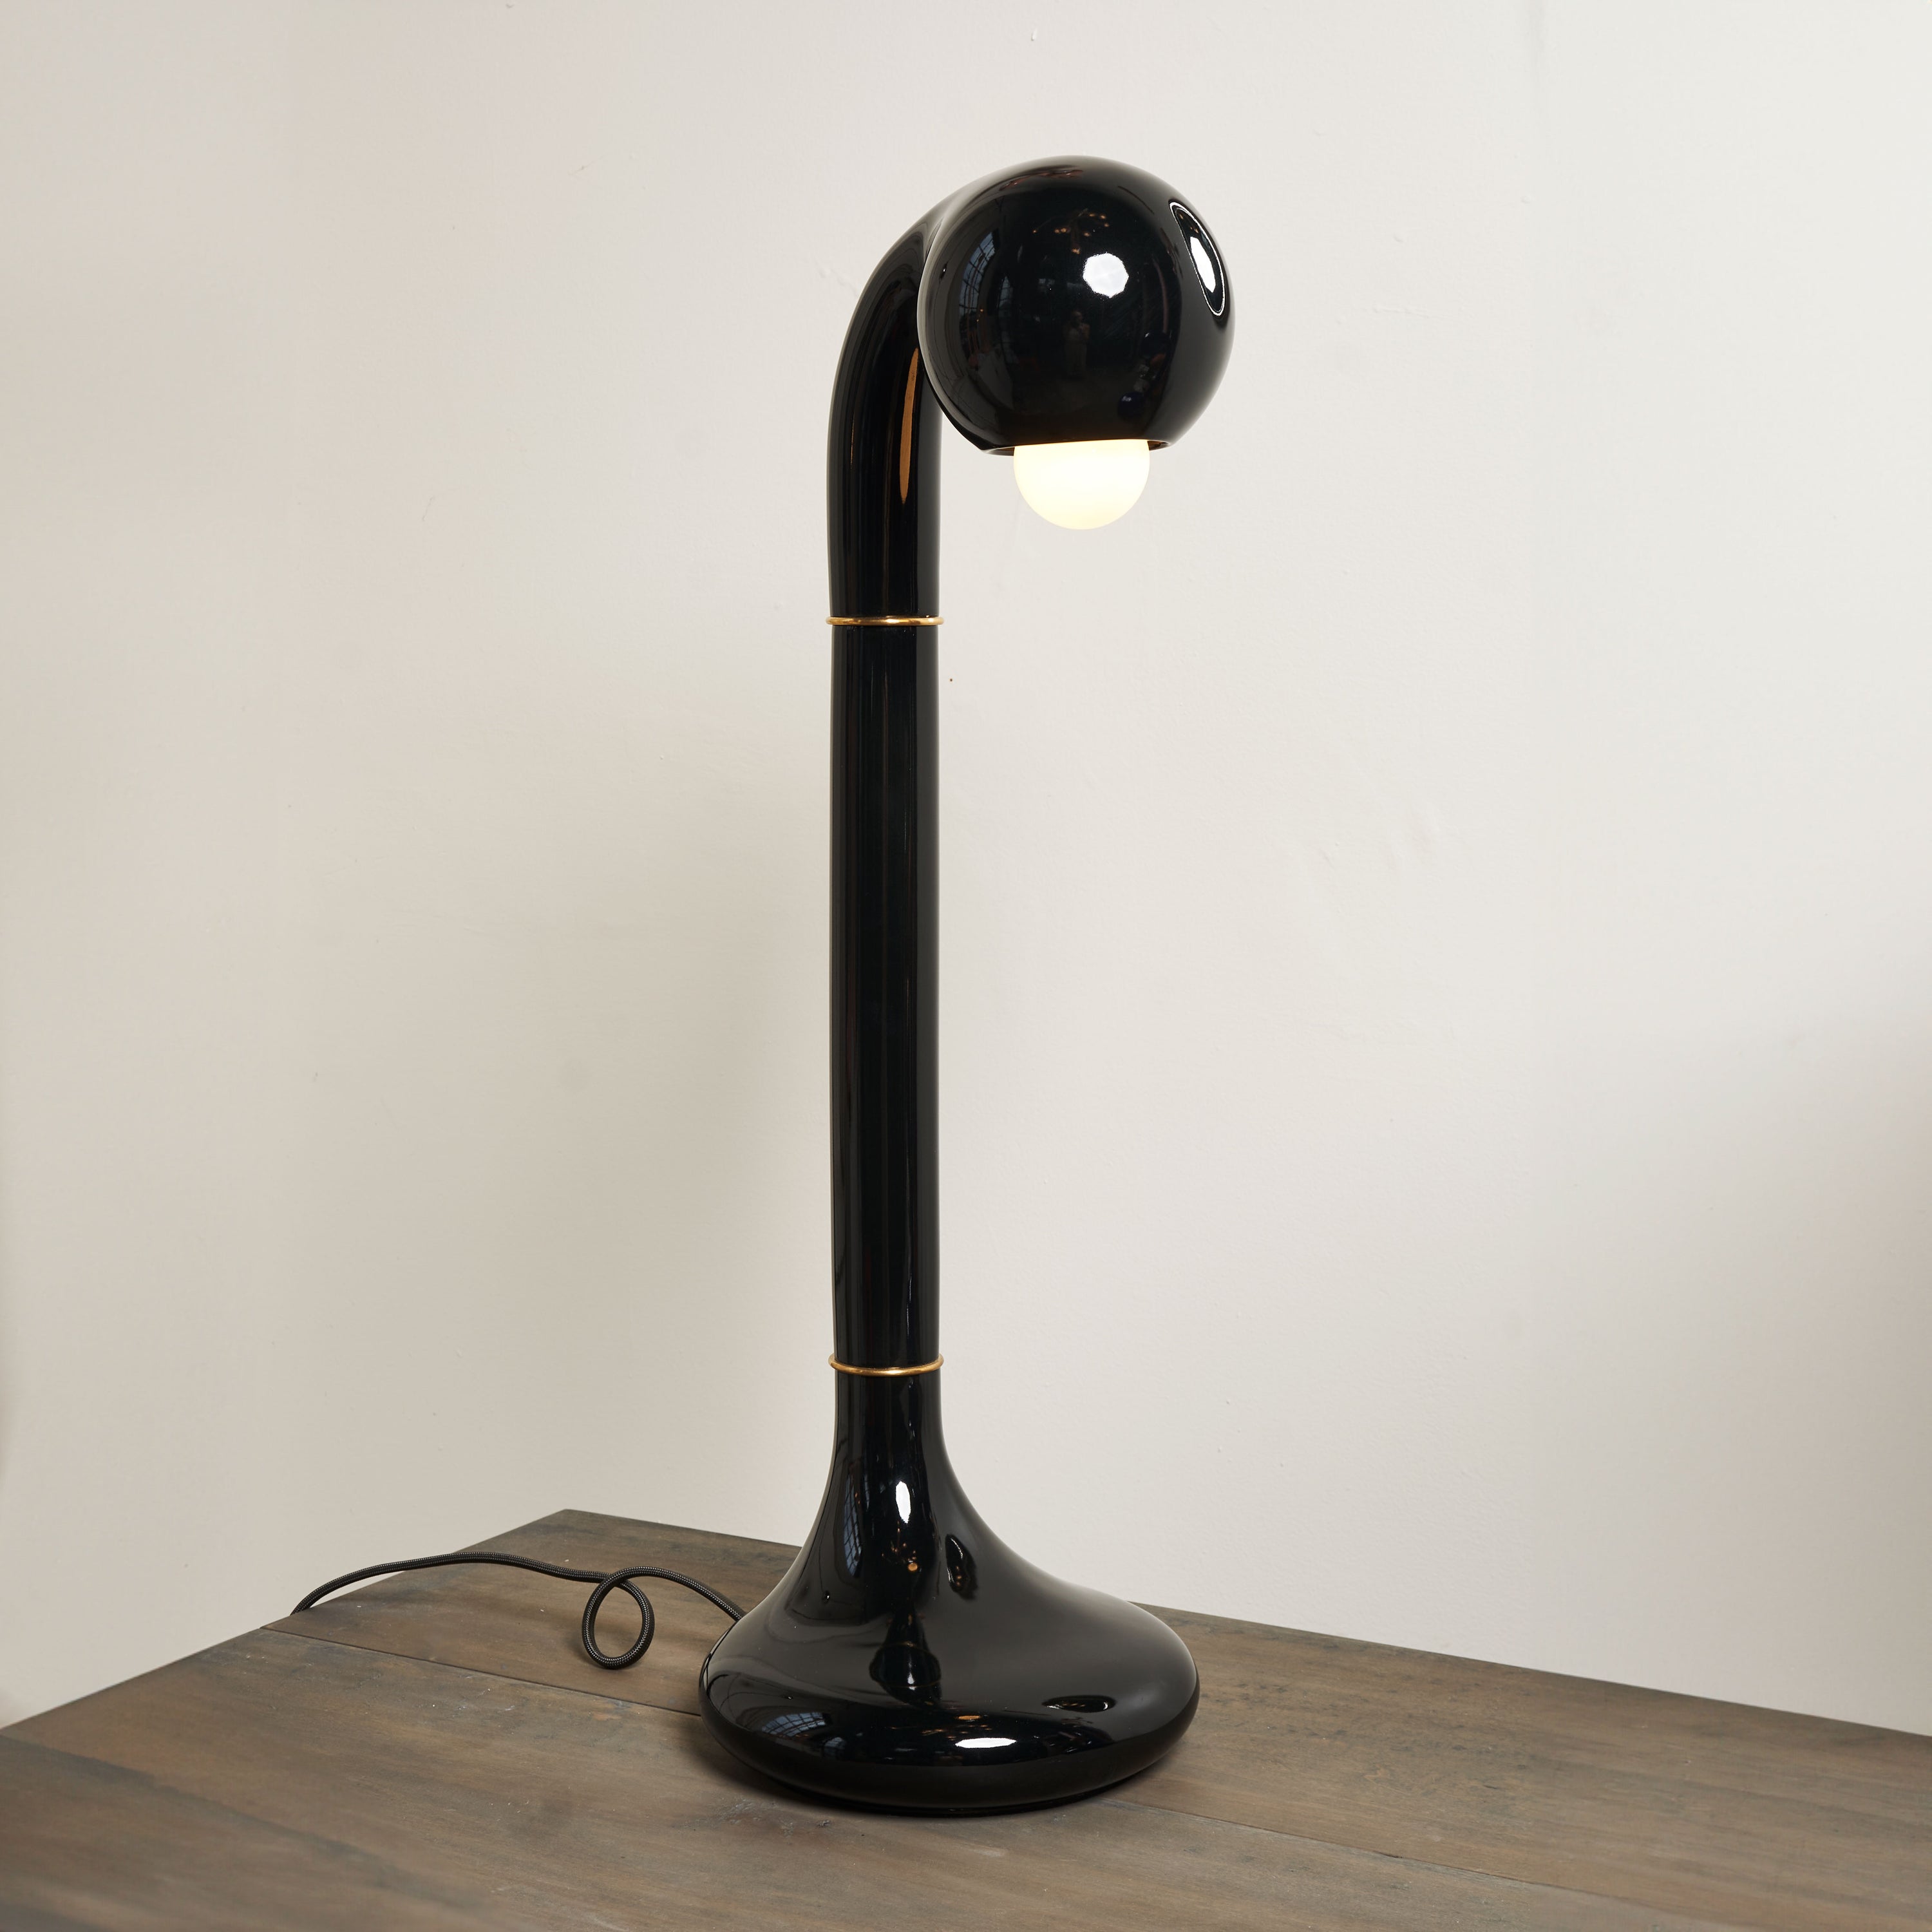 24” TABLE LAMP